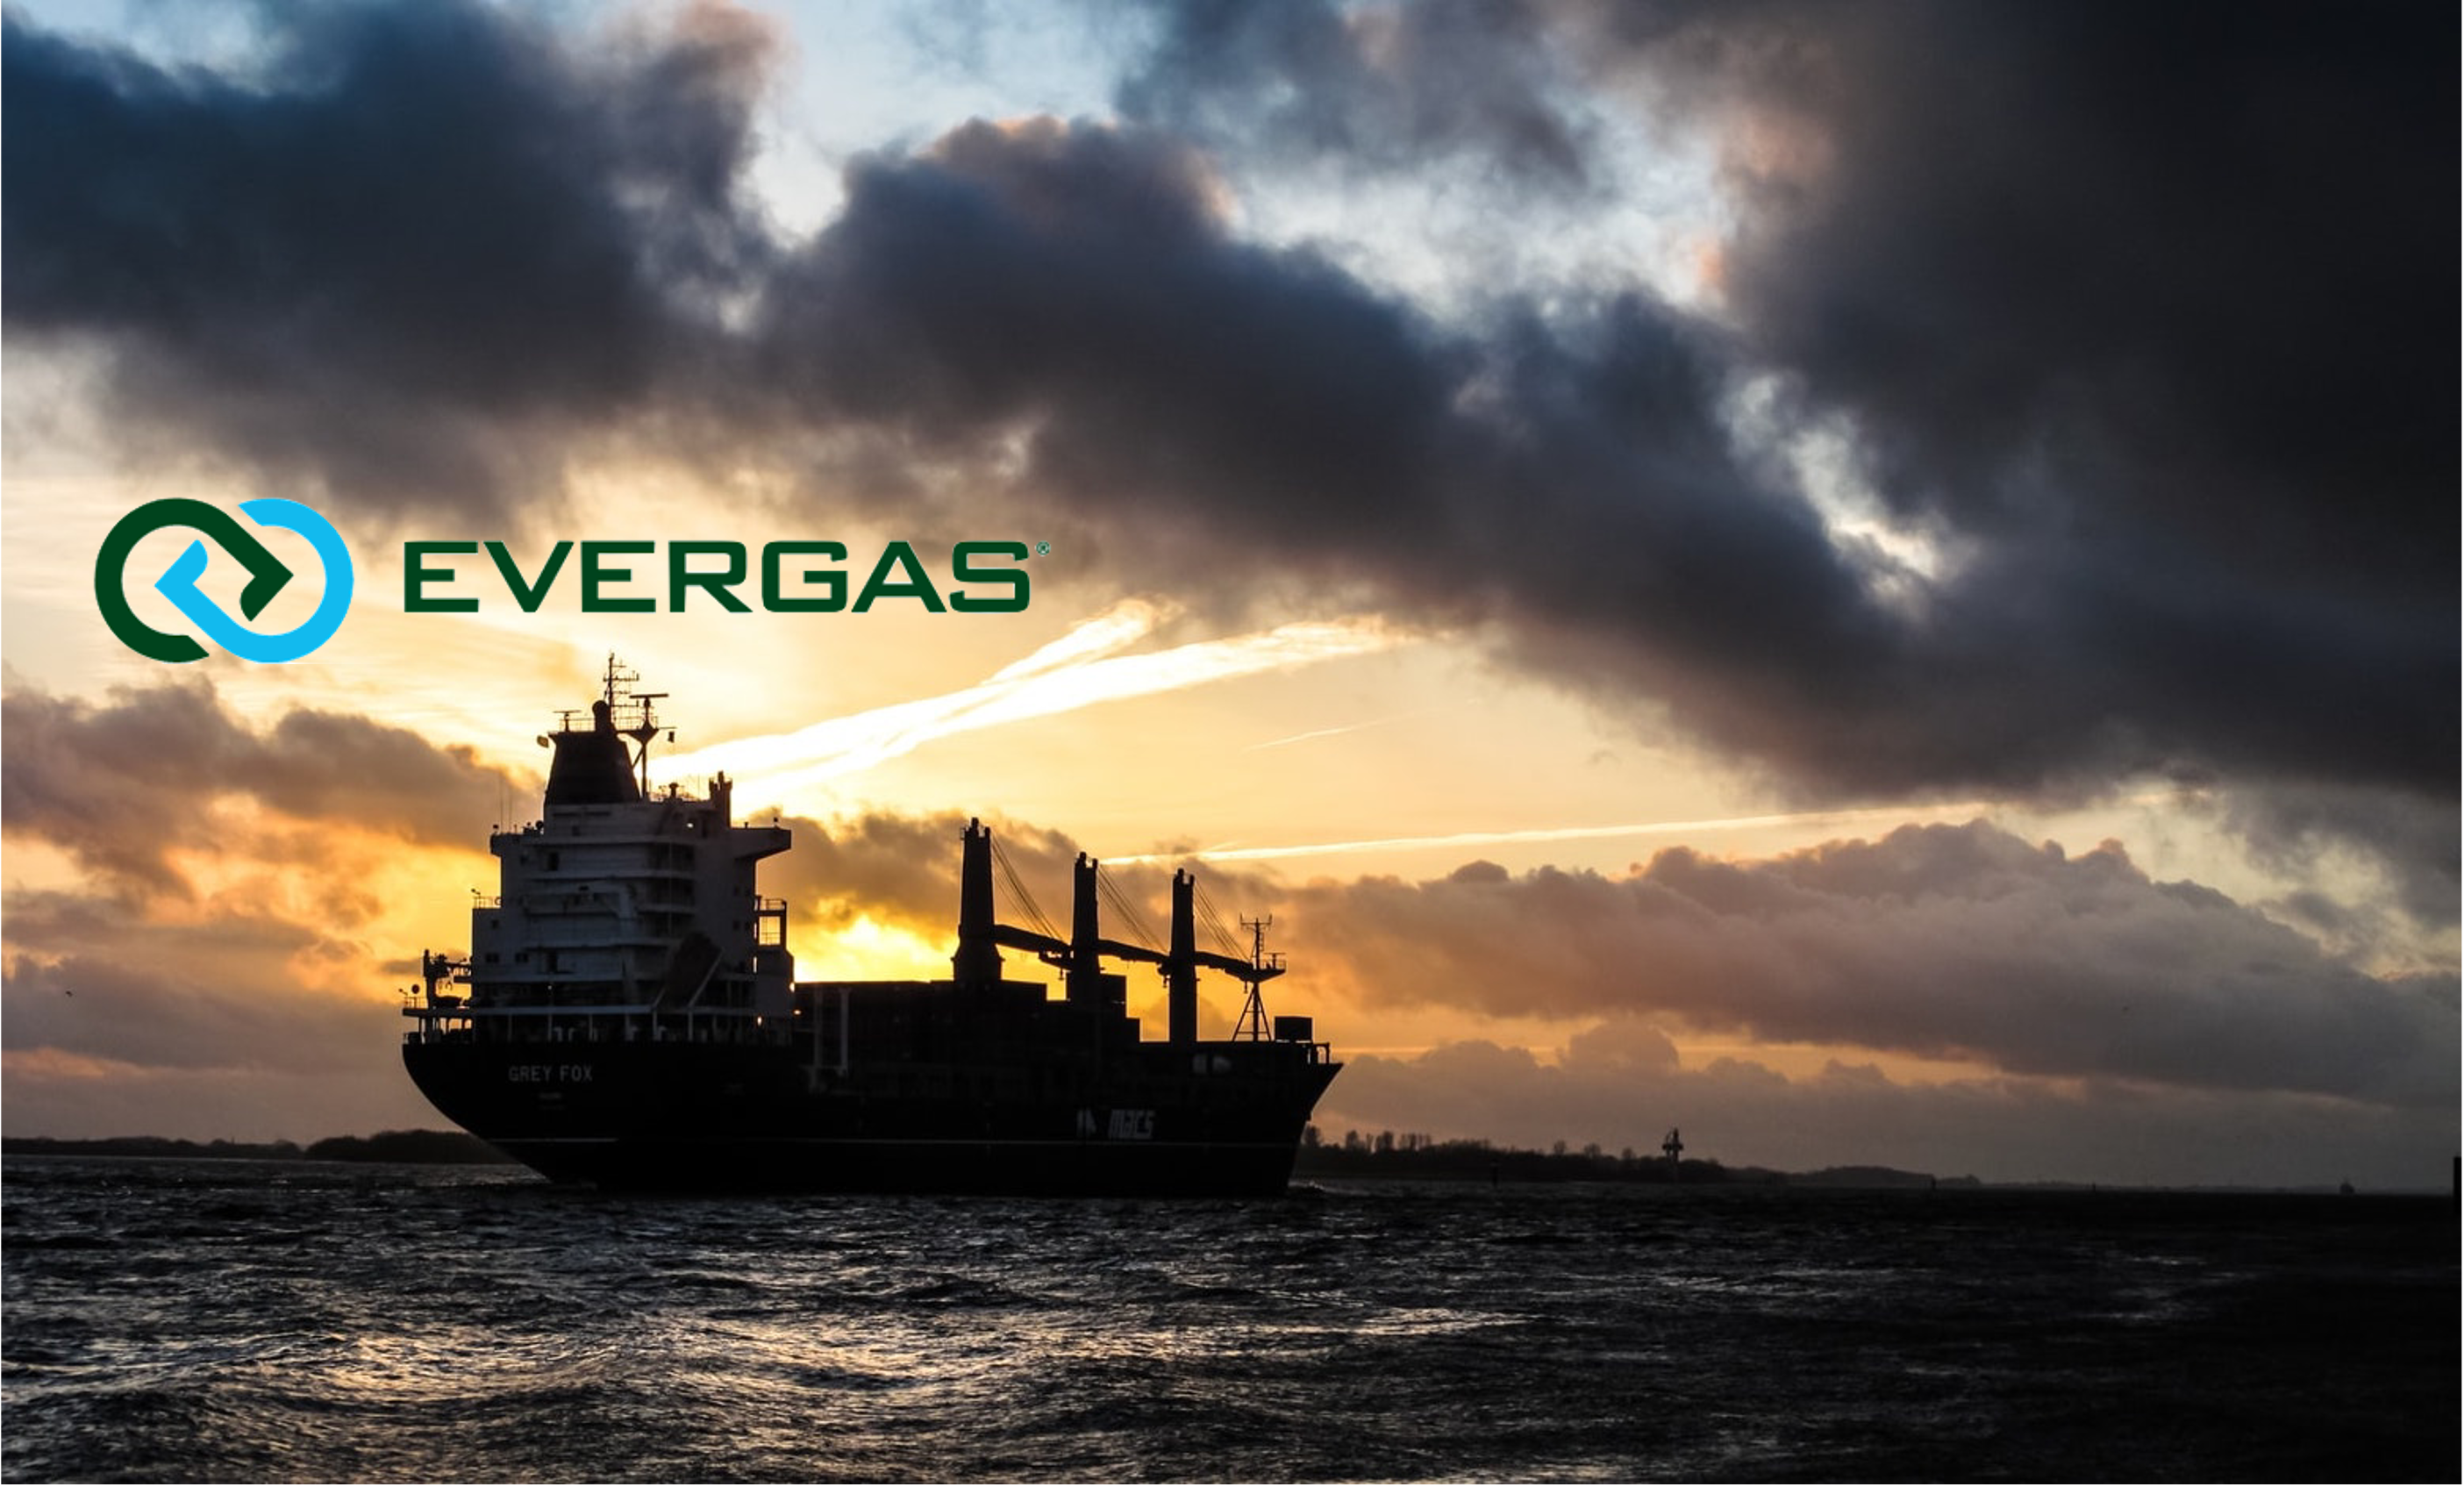 evergas small with logo